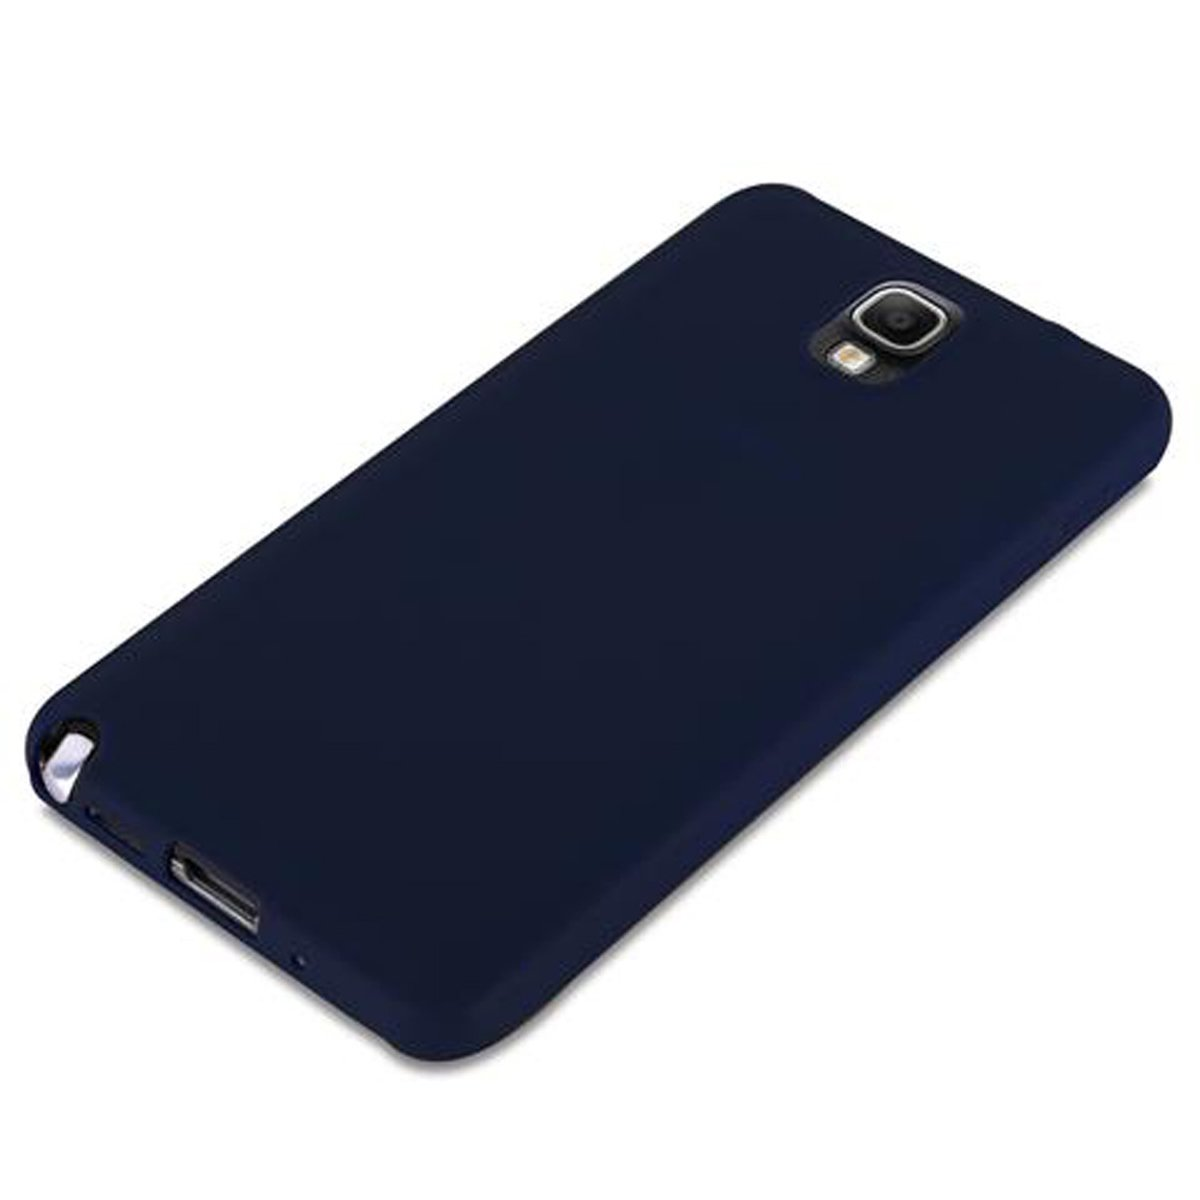 NOTE CANDY Candy 3, im Galaxy Backcover, Hülle TPU Style, DUNKEL Samsung, BLAU CADORABO